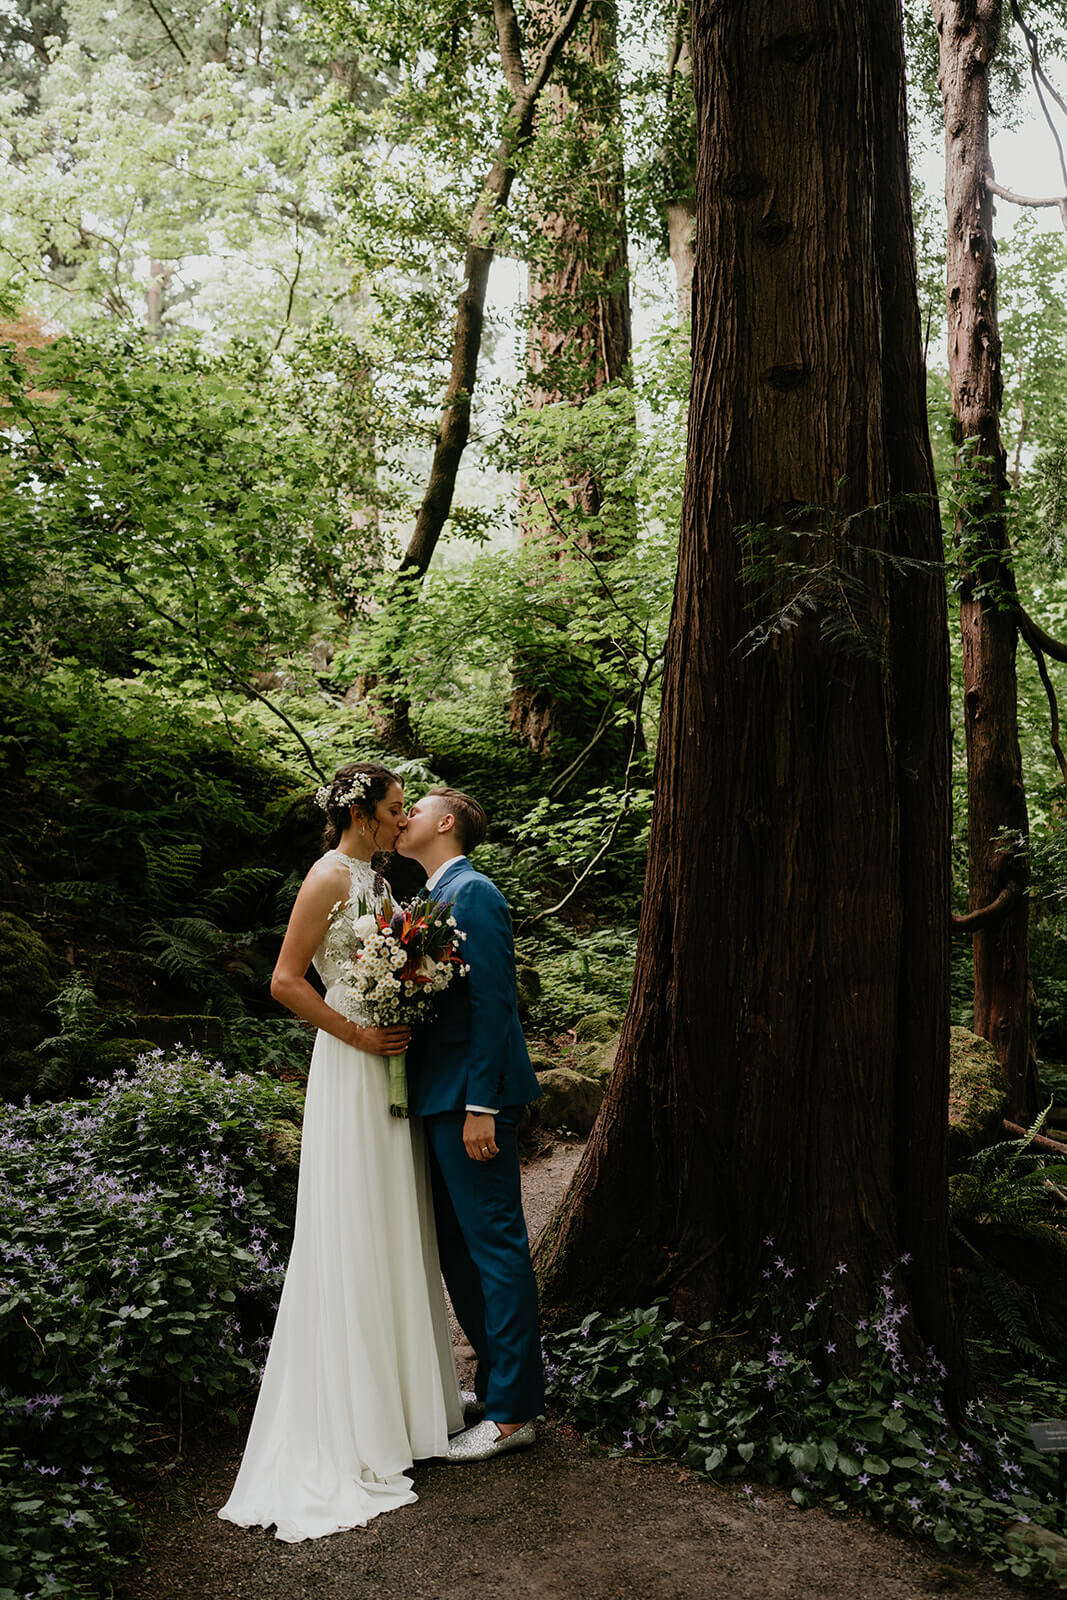 Wedding portraits in the forest with two brides